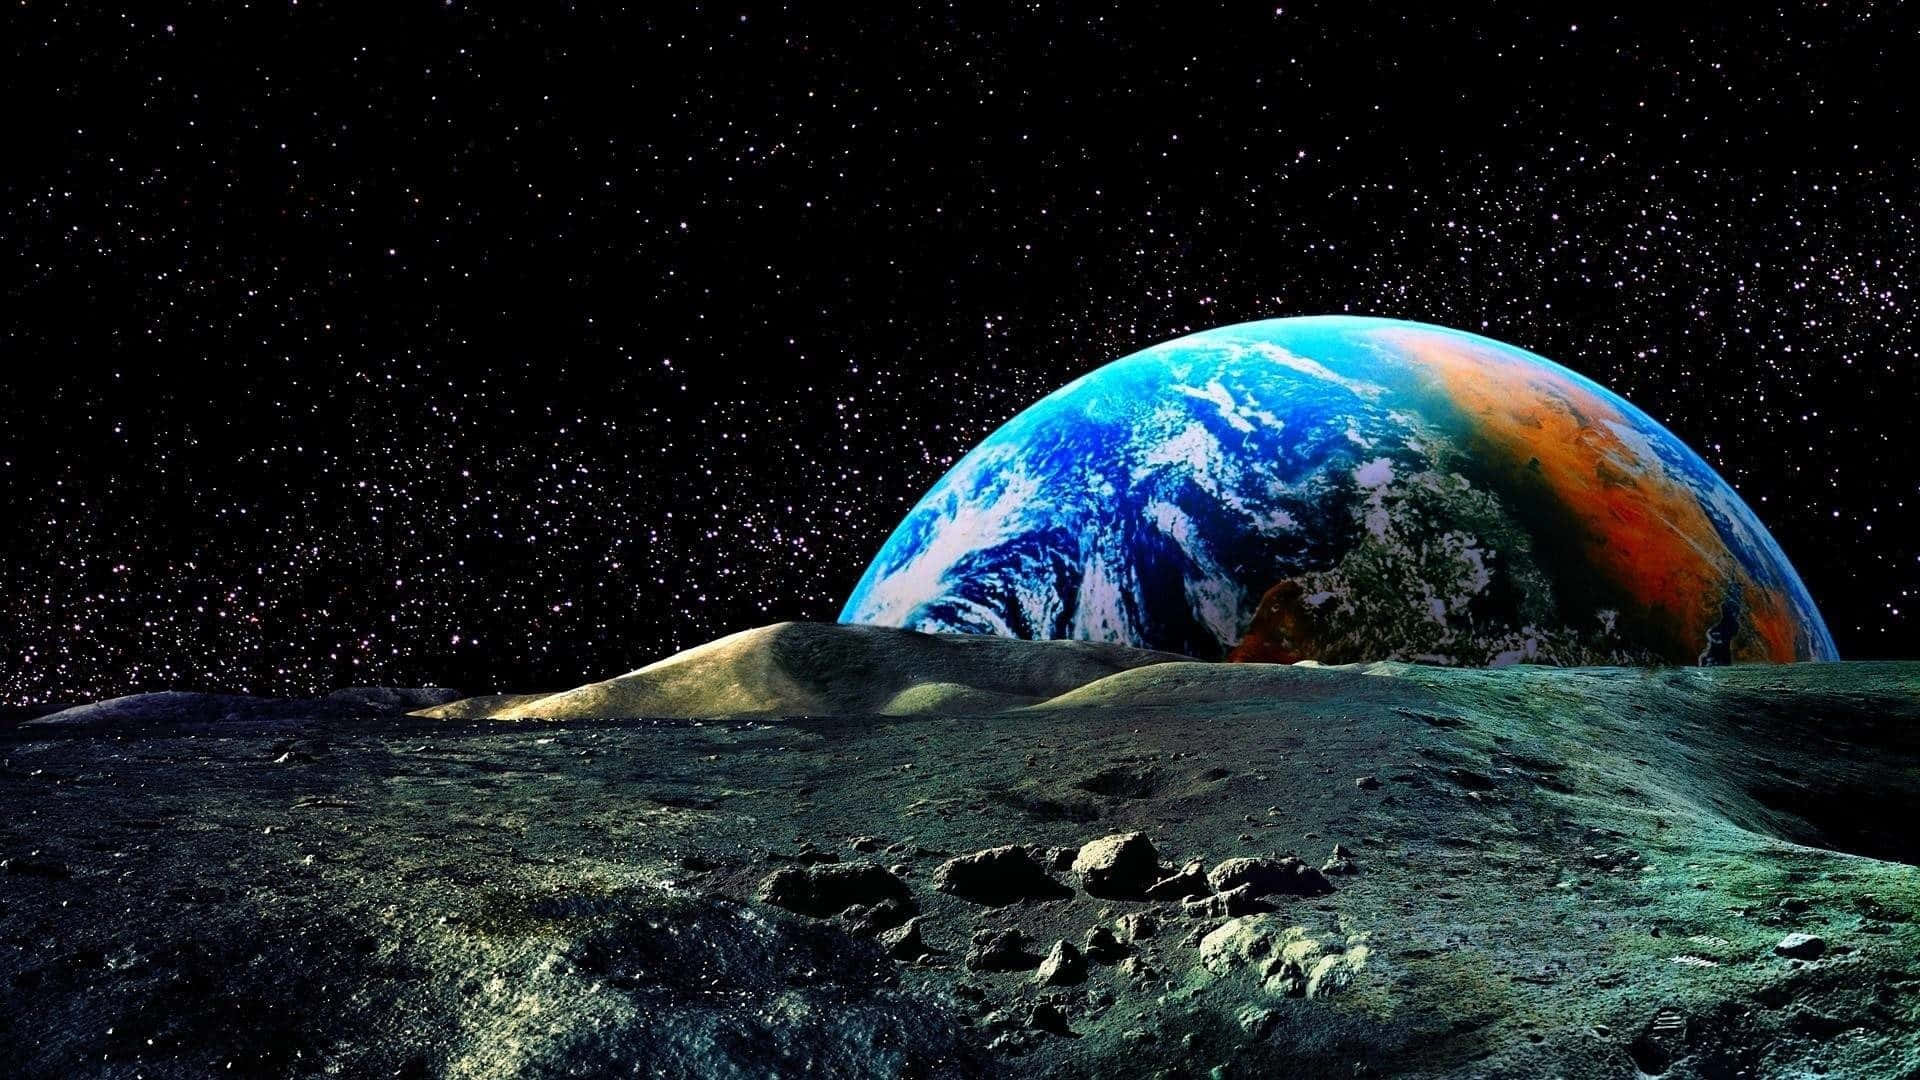 trippy space wallpaper planet earth